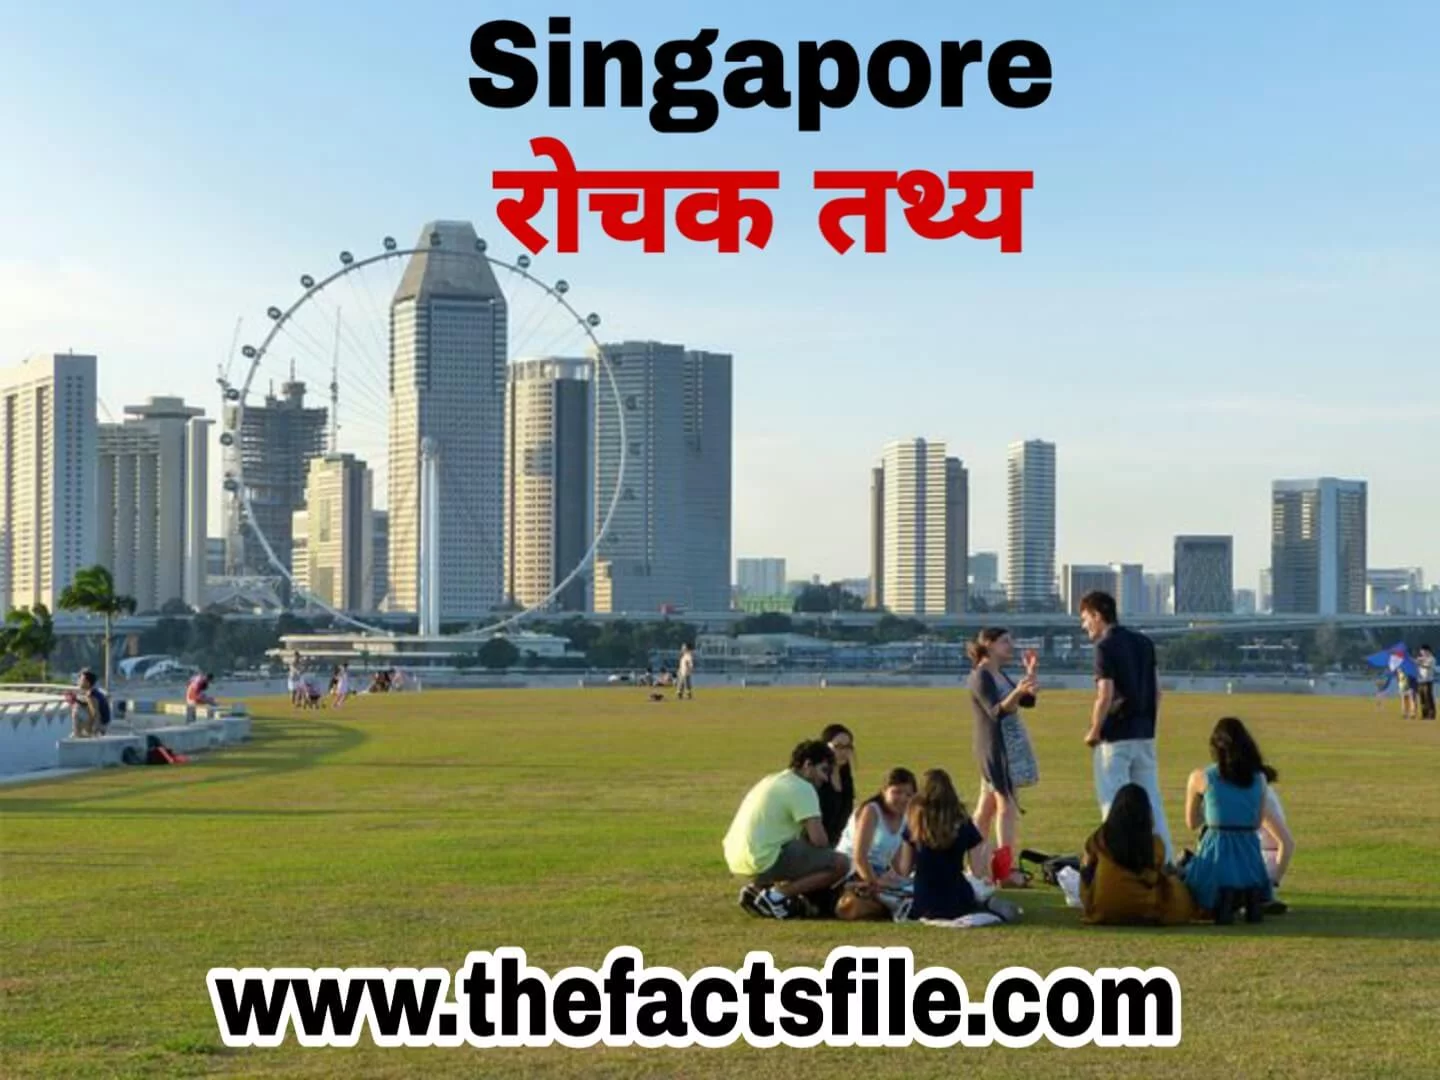 सिंगापर के बारे में 21 रोचक तथ्य | Facts and Information about Singapore in HIndi